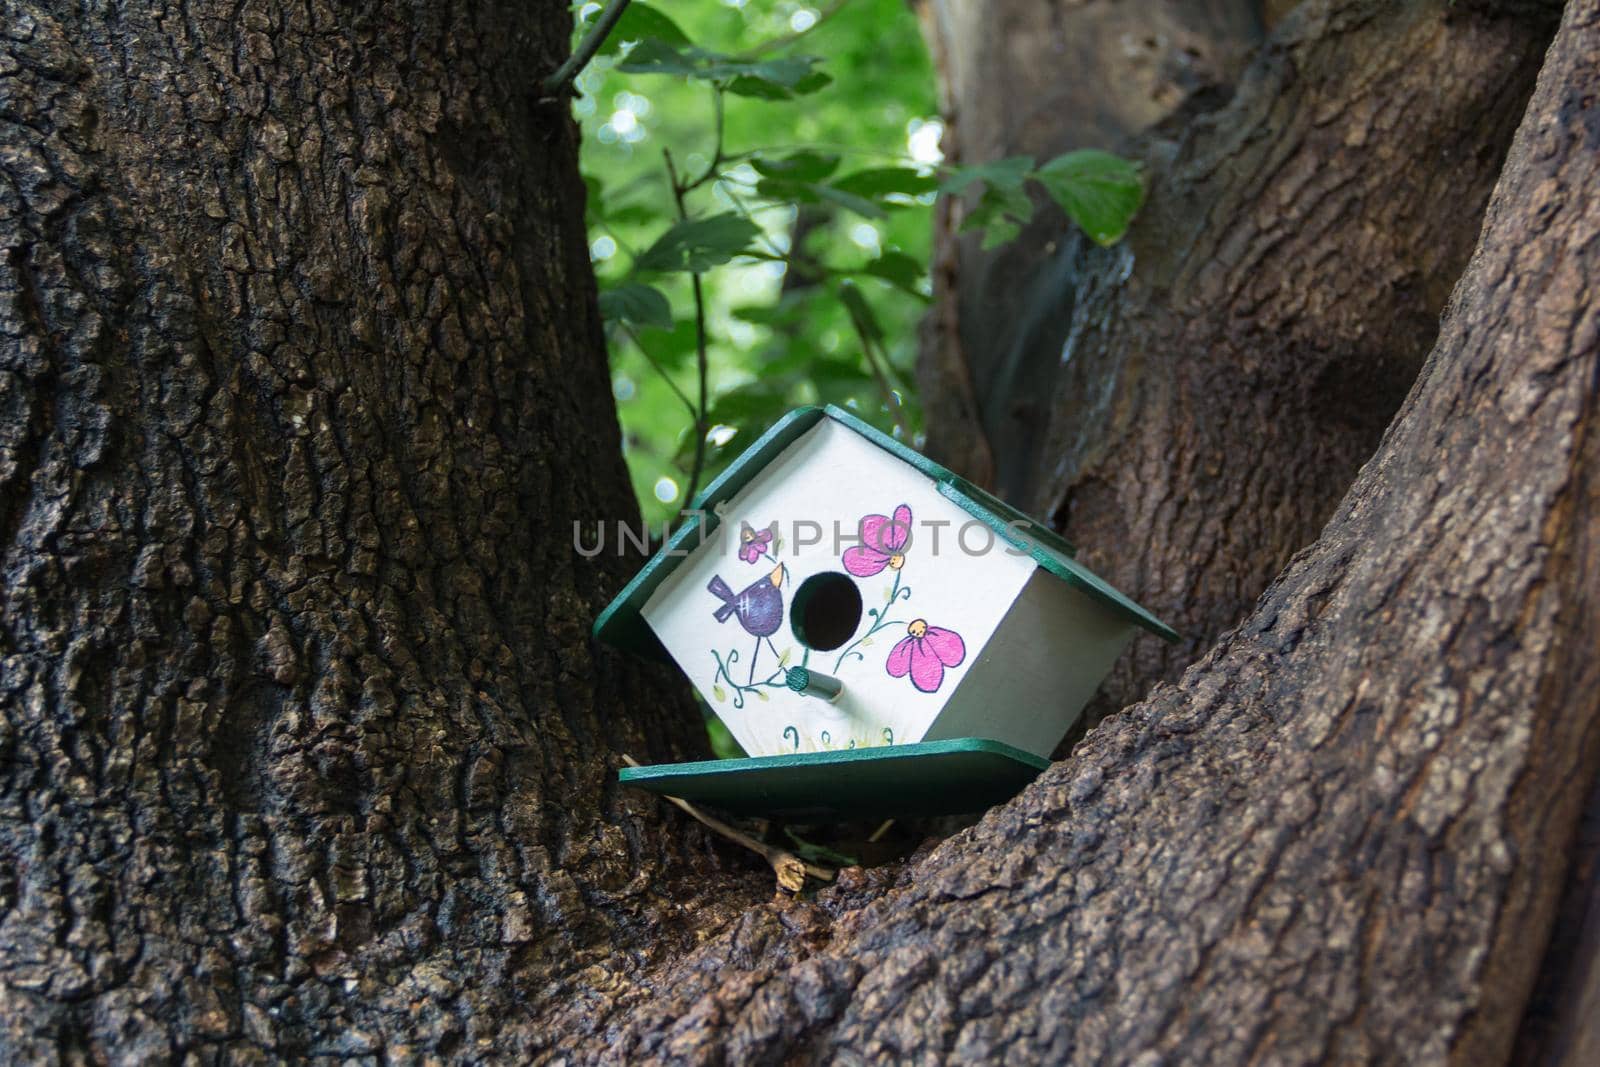 handmade houses for birds hand painted on the tree trunk in spring by GabrielaBertolini